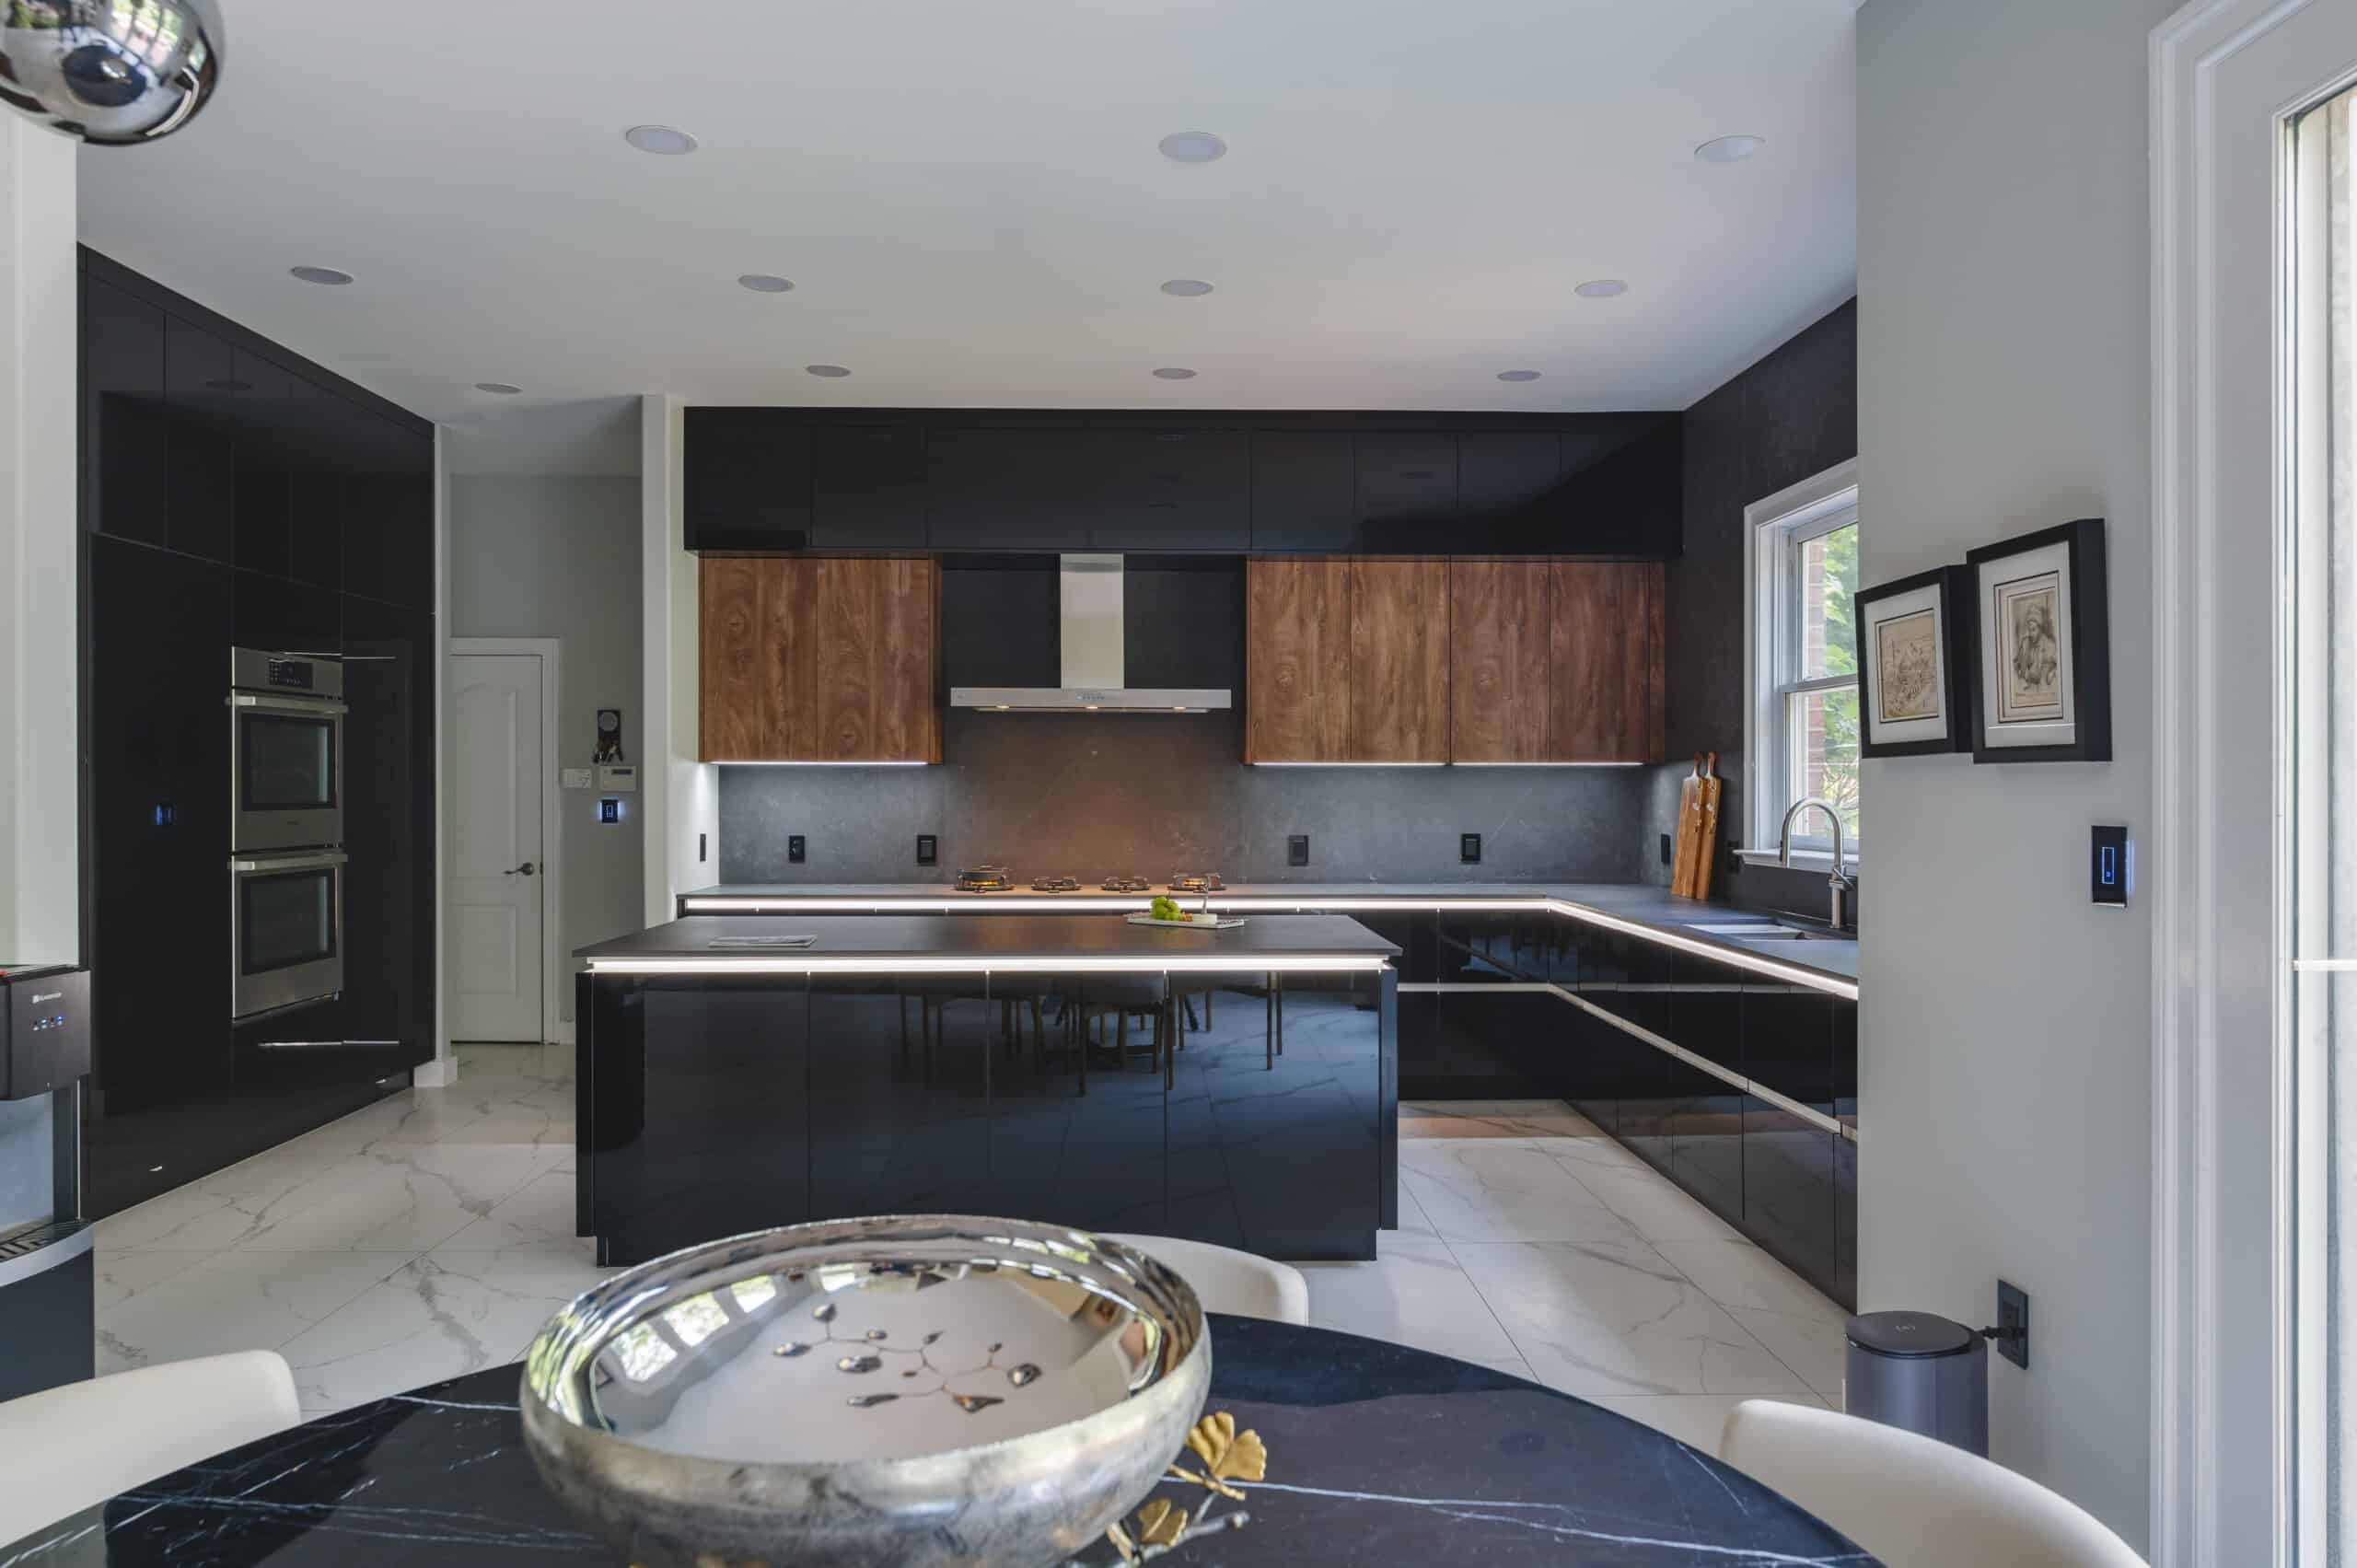 A contemporary kitchen featuring sleek black countertops and elegant wooden cabinet